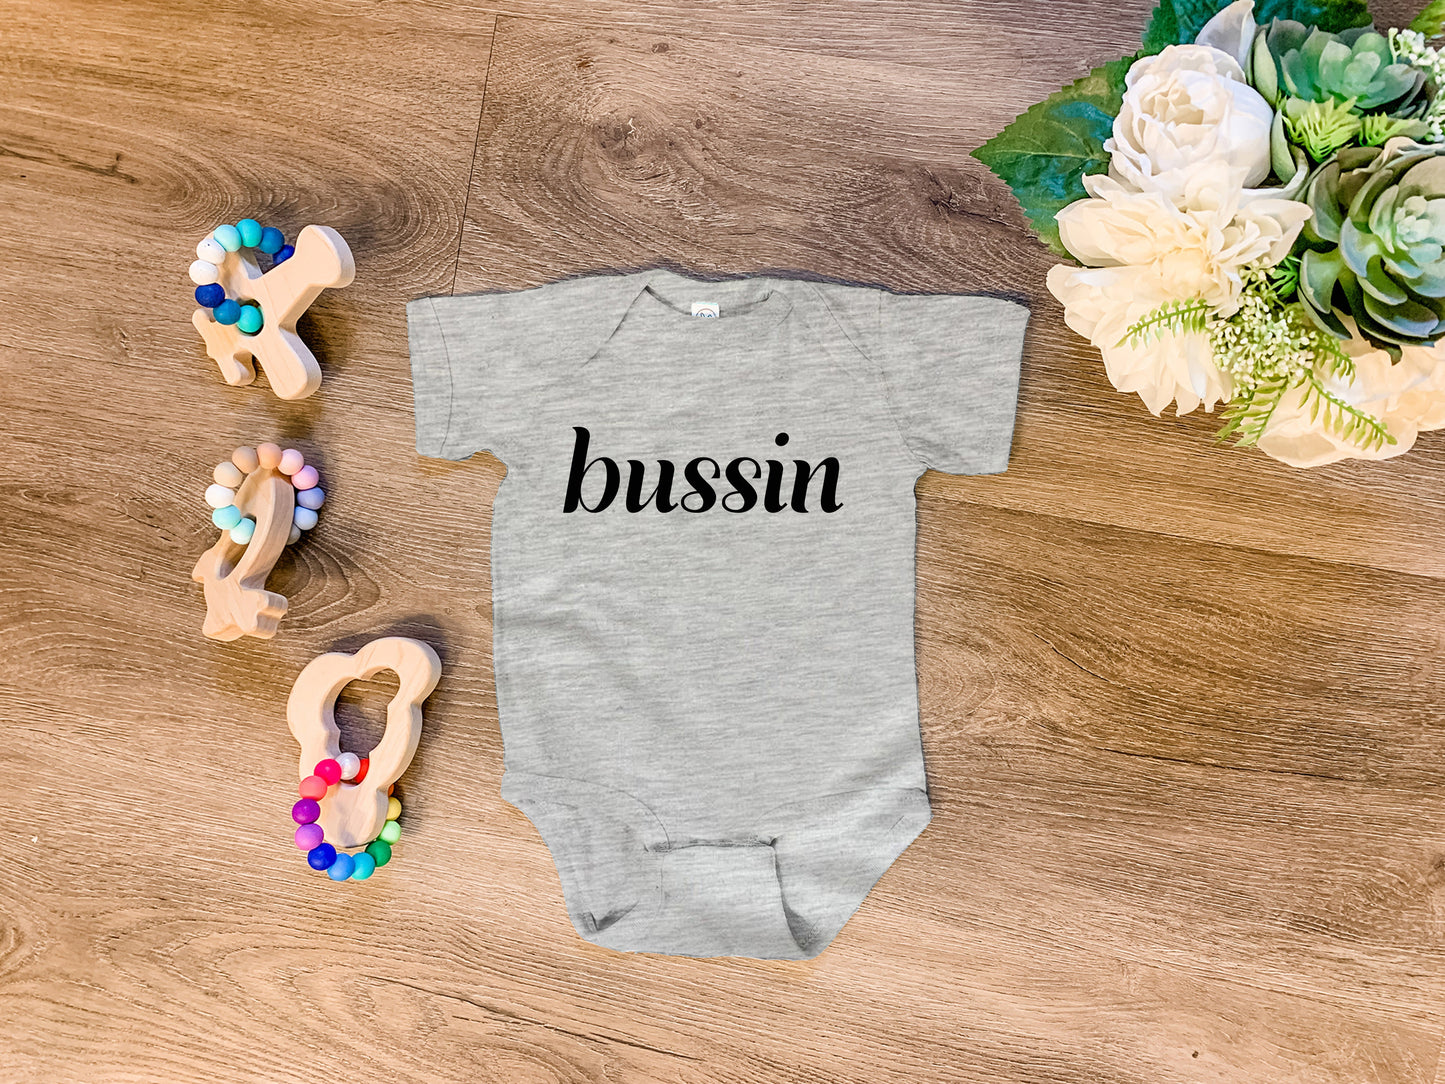 Bussin - Onesie - Heather Gray, Chill, or Lavender